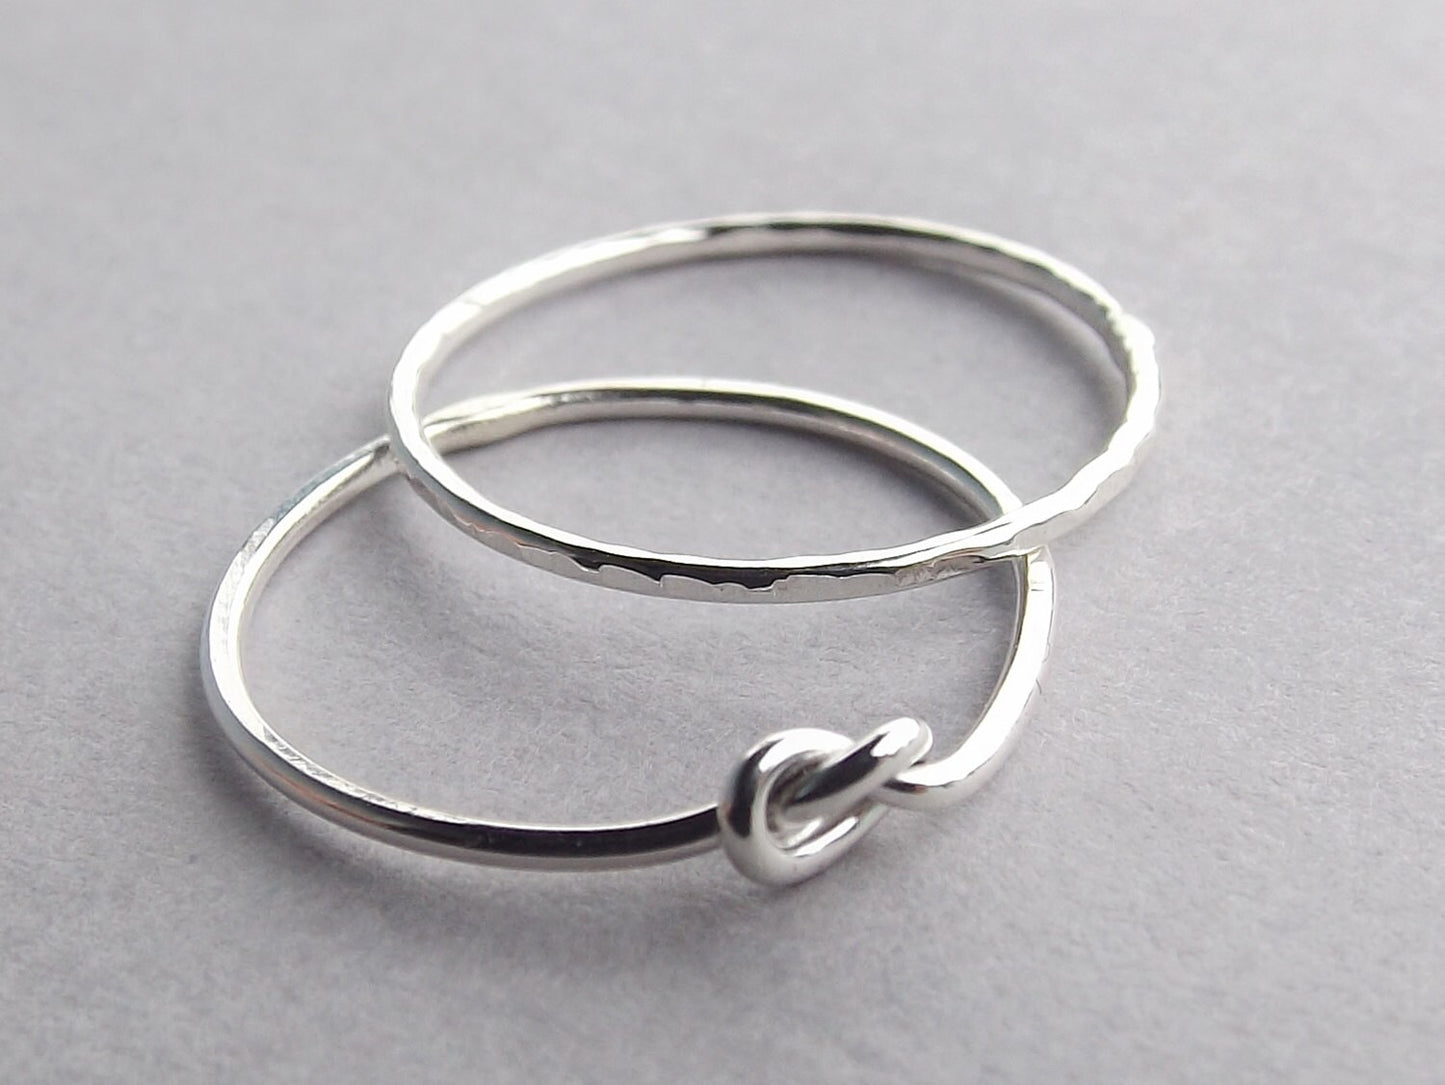 Silver Knot Knuckle Ring Set, Knot Ring, Stacking Rings, above knuckle, Knuckle Rings, Toe Rings, Rings, Yellow Goldfilled Knuckle Ring